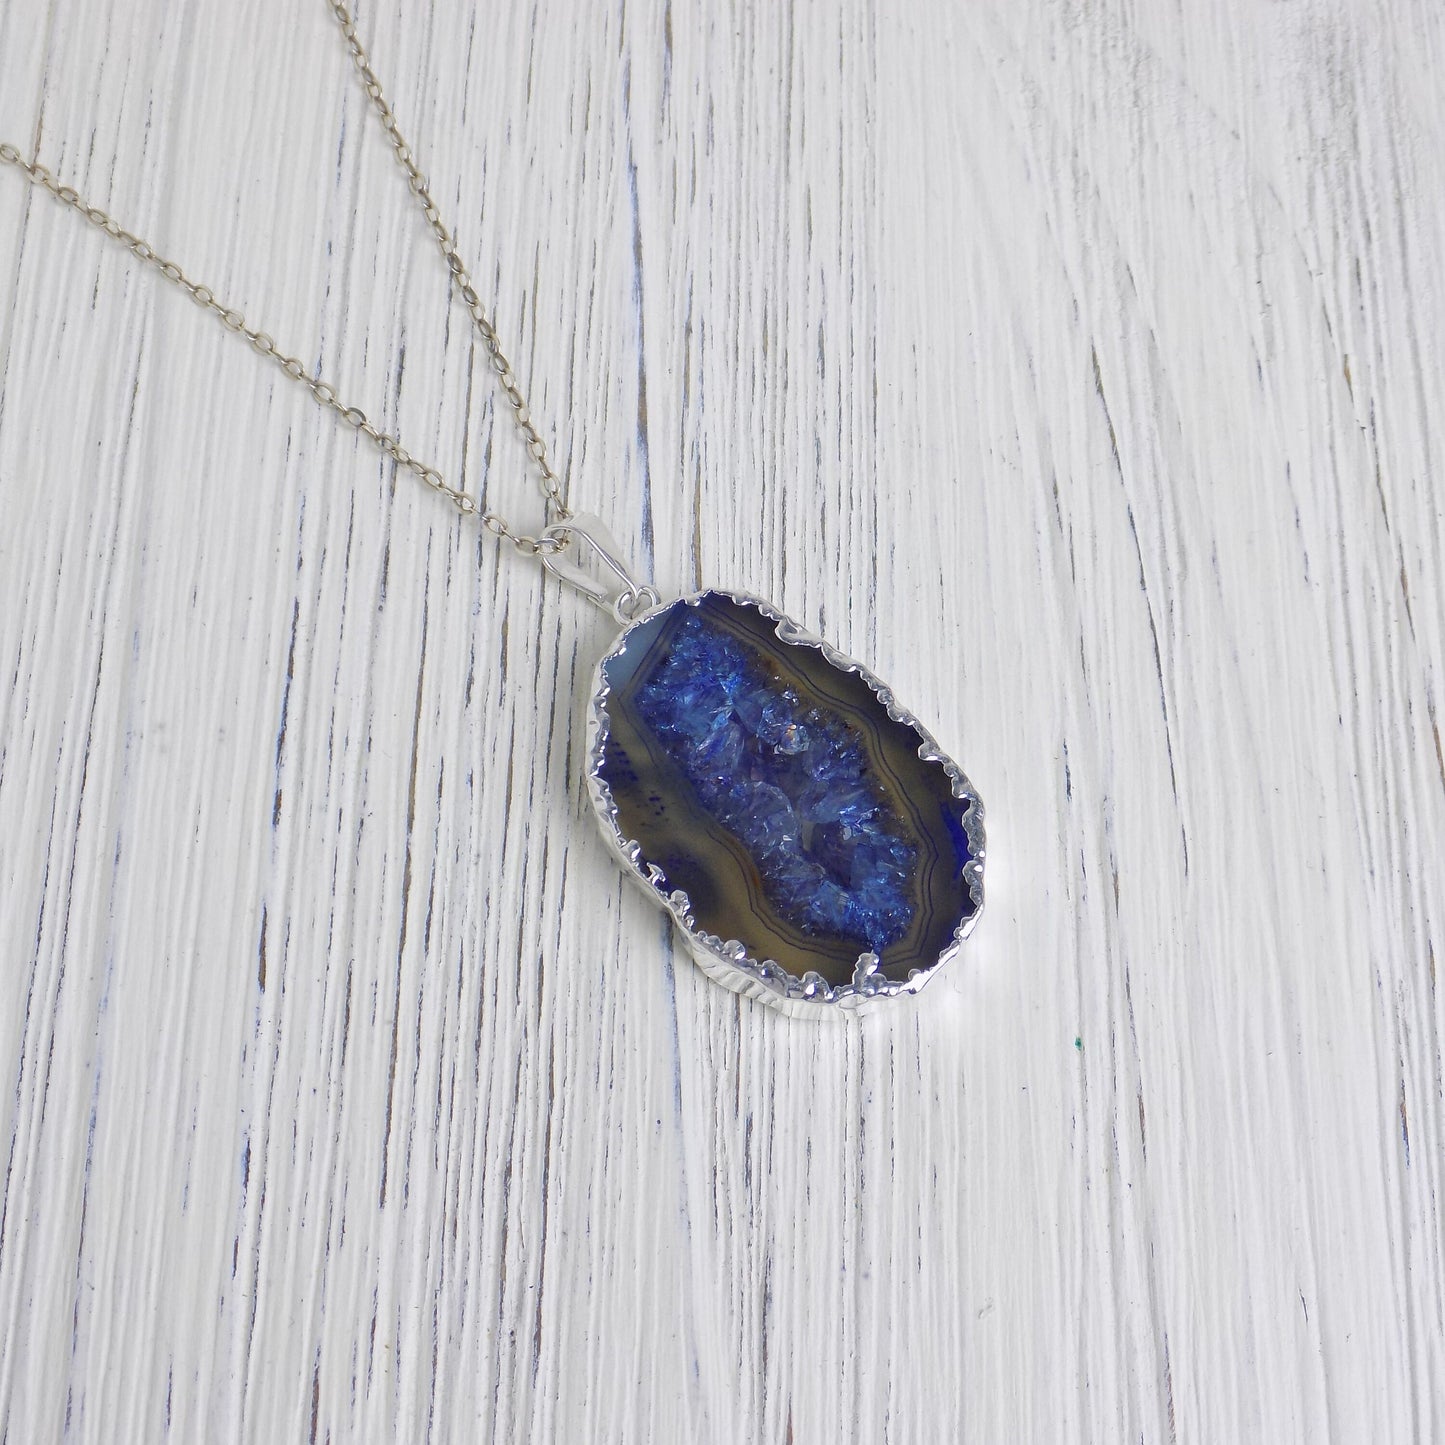 Small Geode Necklace Blue, Raw Stone Necklace Druzy, Boho Crystal Pendants Silver Chain, Christmas Gift Women, G14-270